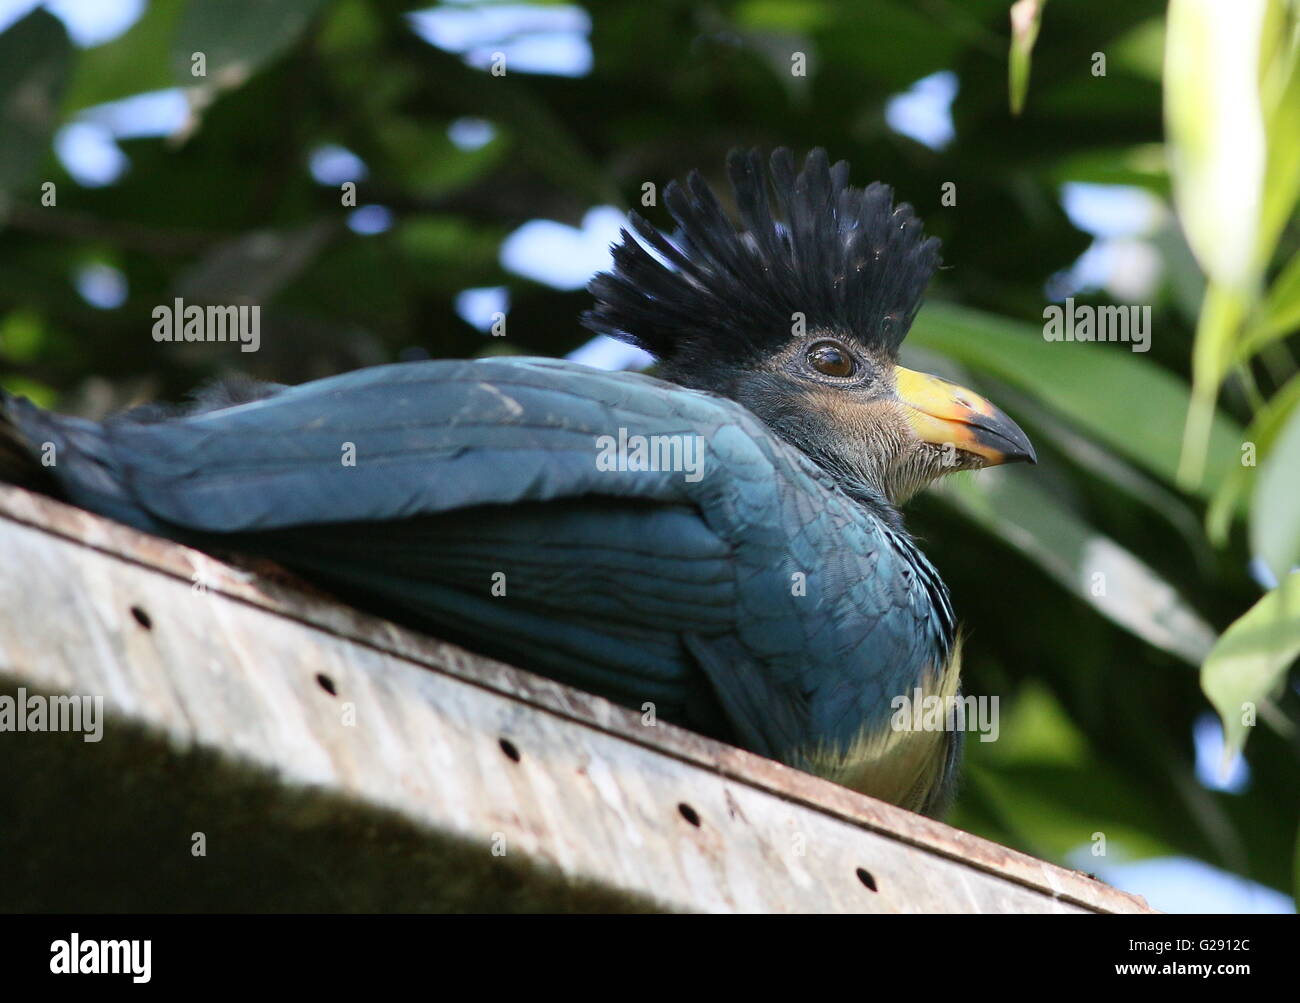 Juvenile Central African Great blue turaco (Corythaeola cristata) in a Dutch Zoo Stock Photo